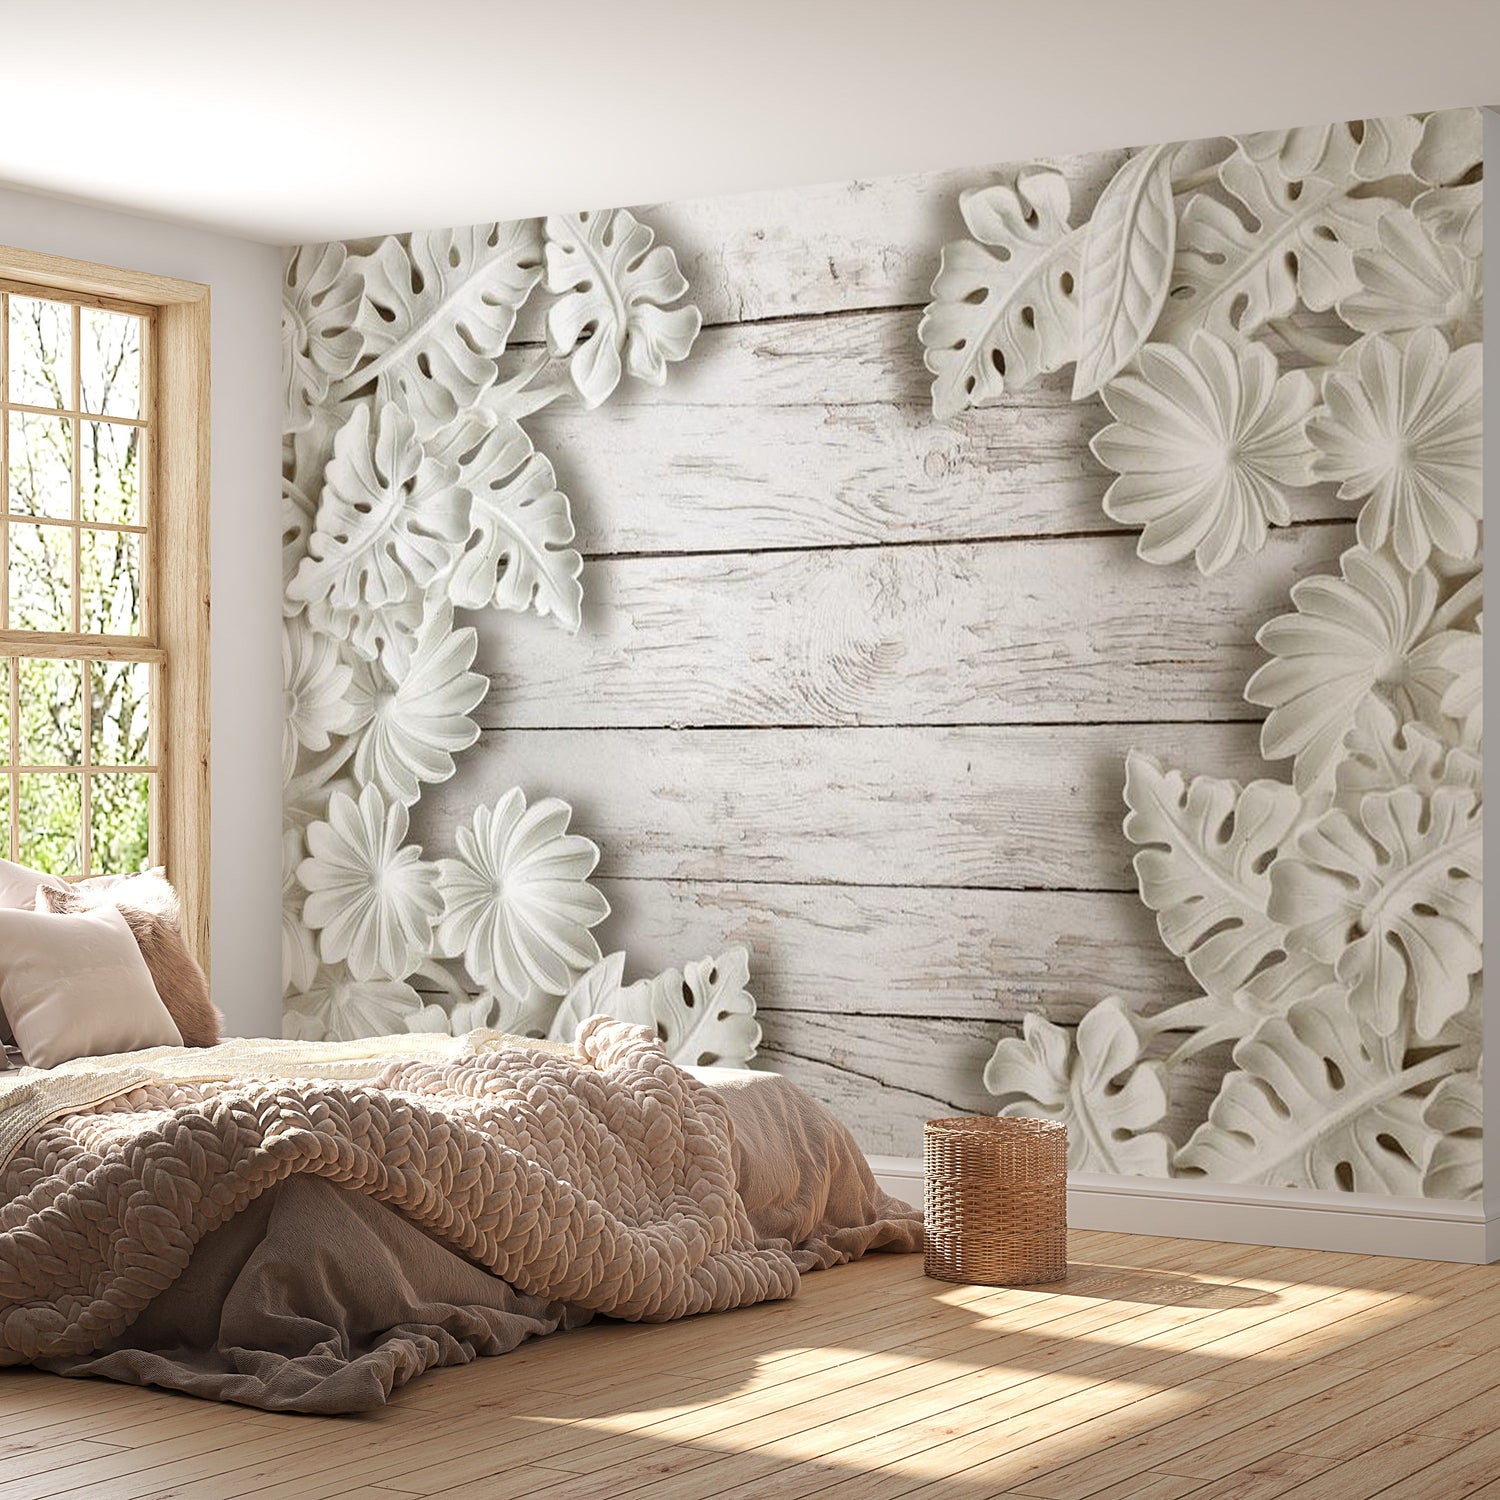 Peel & Stick Wall Mural - White Washed Wood - Removable Wall Decals